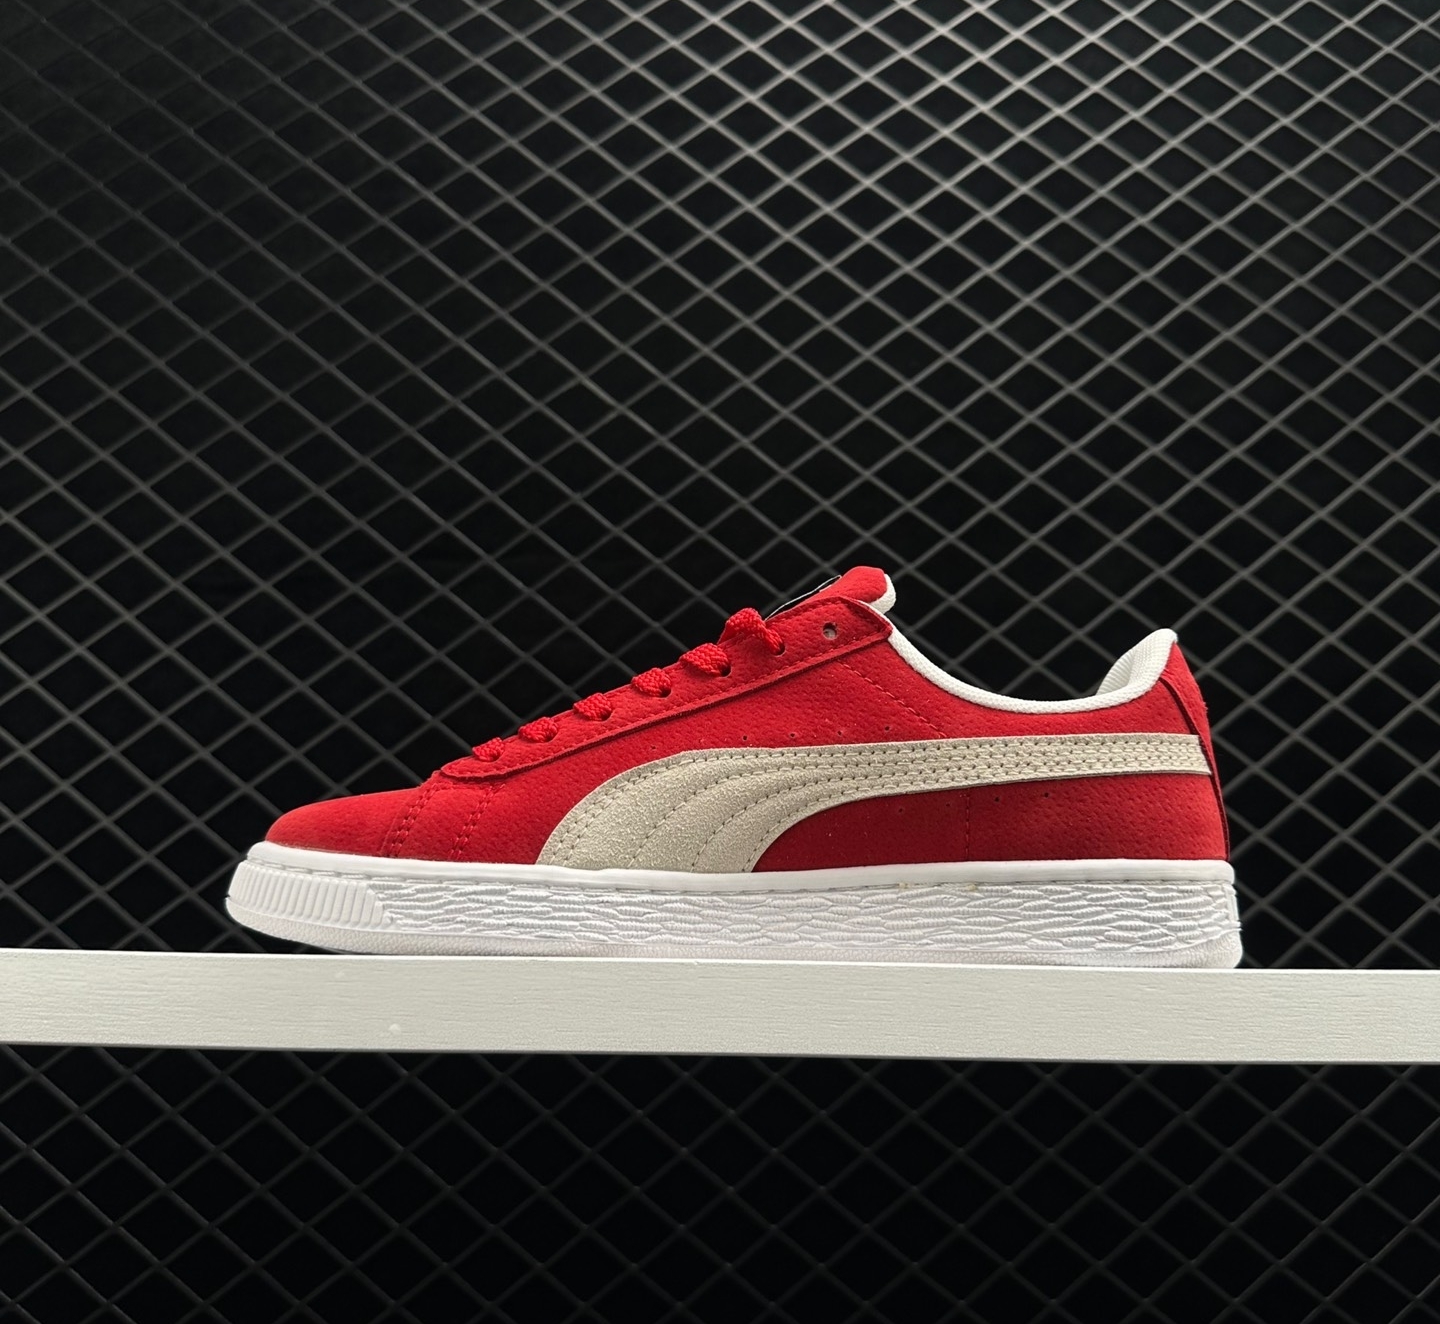 Puma Suede Classic XXI Red 374915 02 - Stylish & Iconic Men's Sneakers